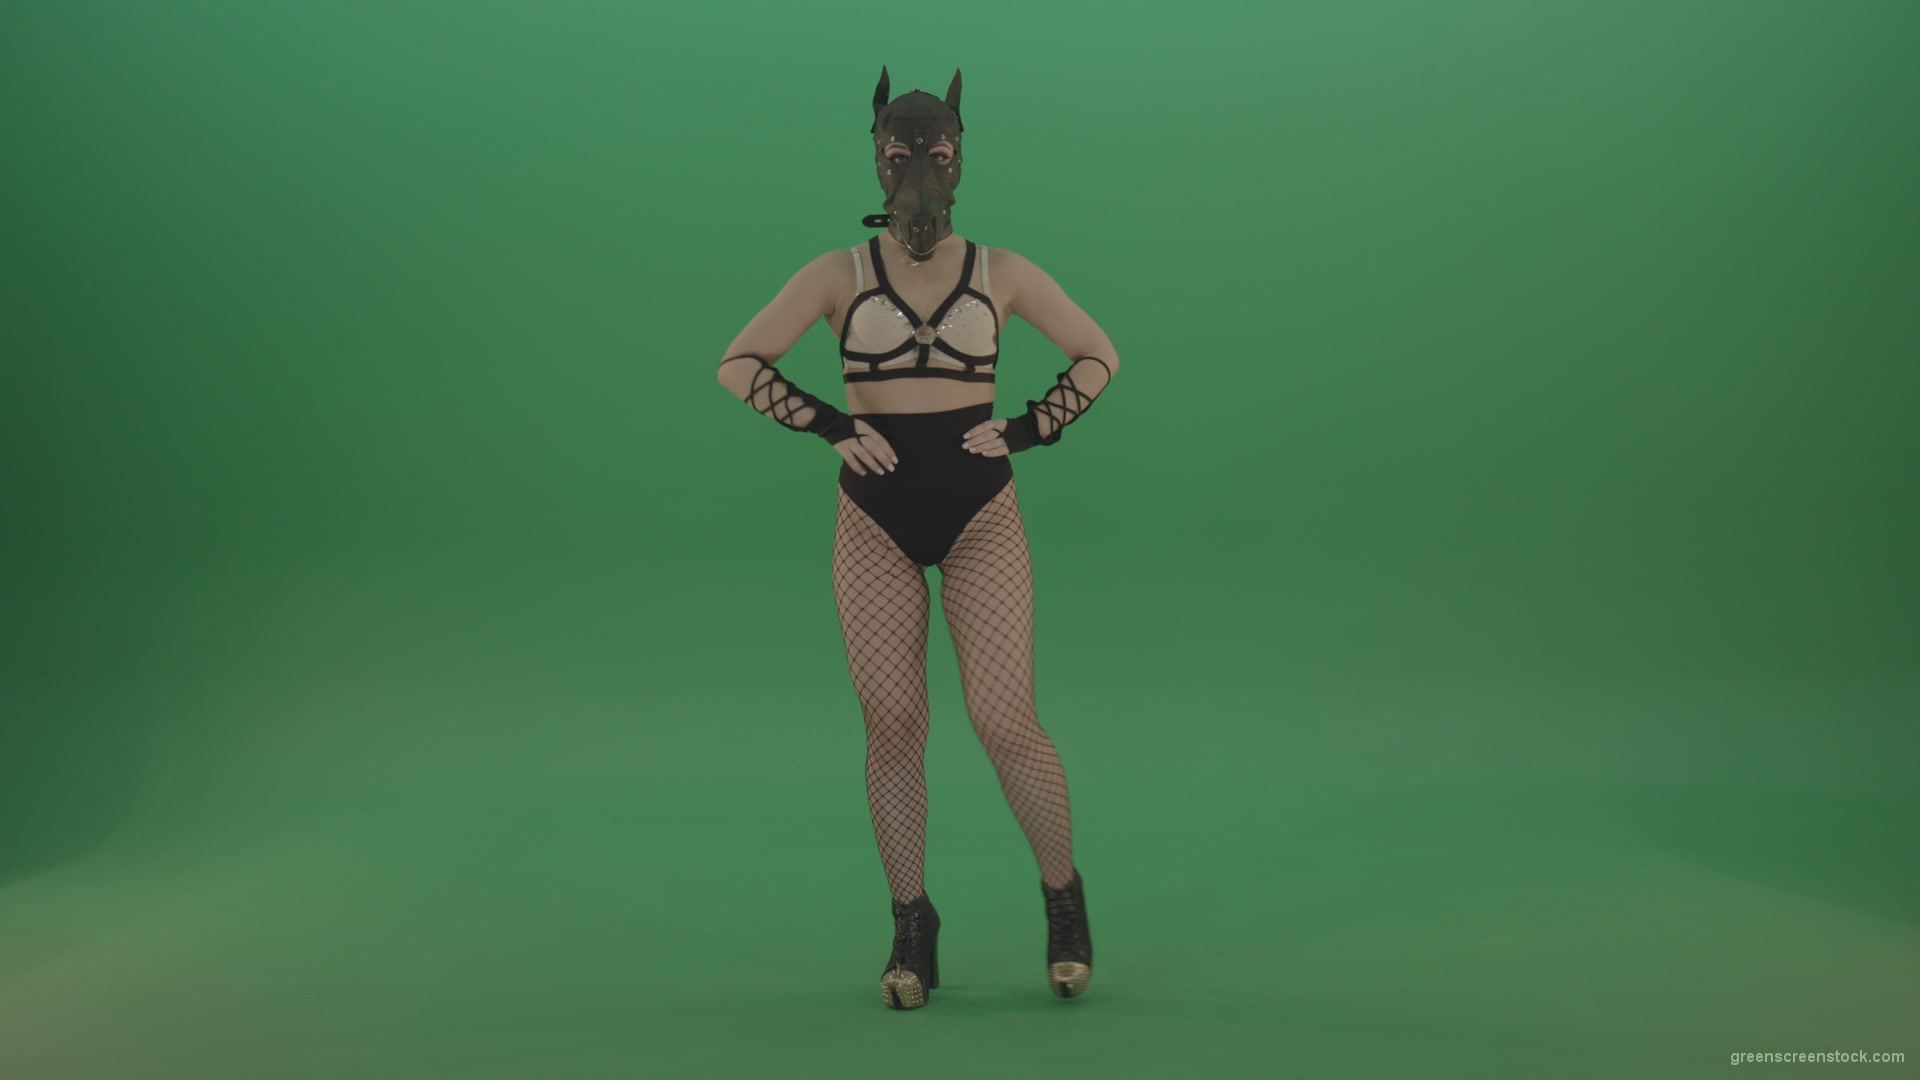 EDM-Girl-in-Wolf-Mask-making-fight-beats-on-green-screen_009 Green Screen Stock